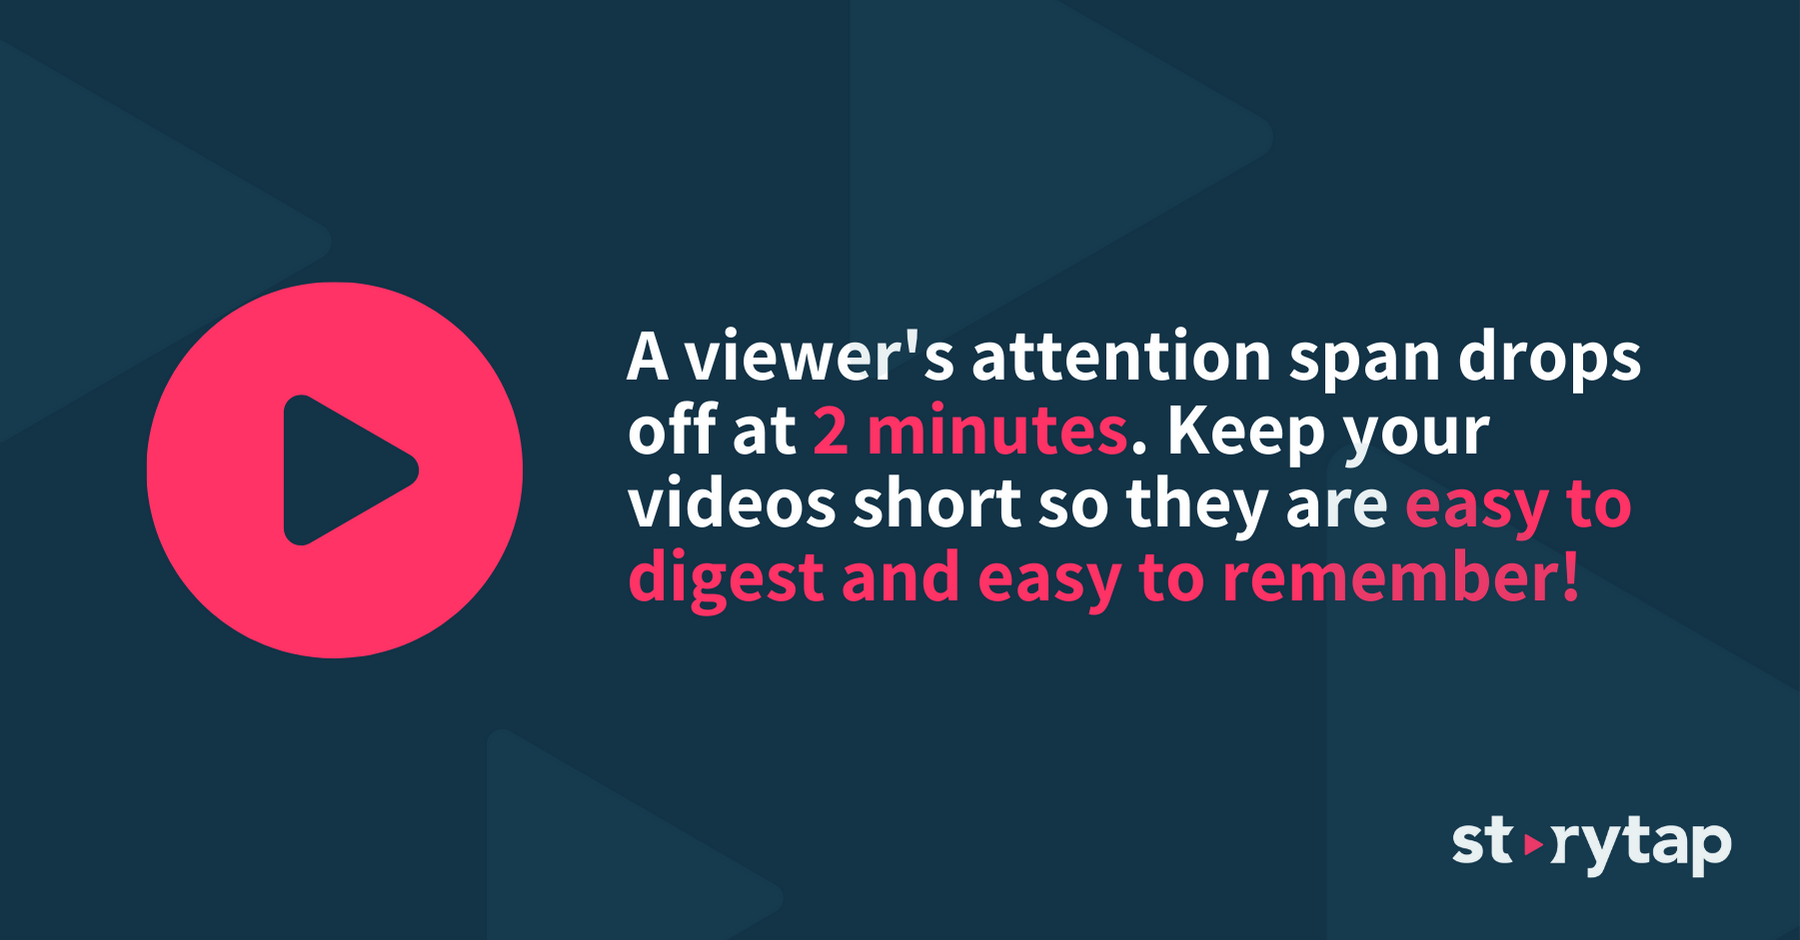 A viewer's attention to span drops off at 2 minutes. Keep your videos short so they are easy to digest and easy to remember!